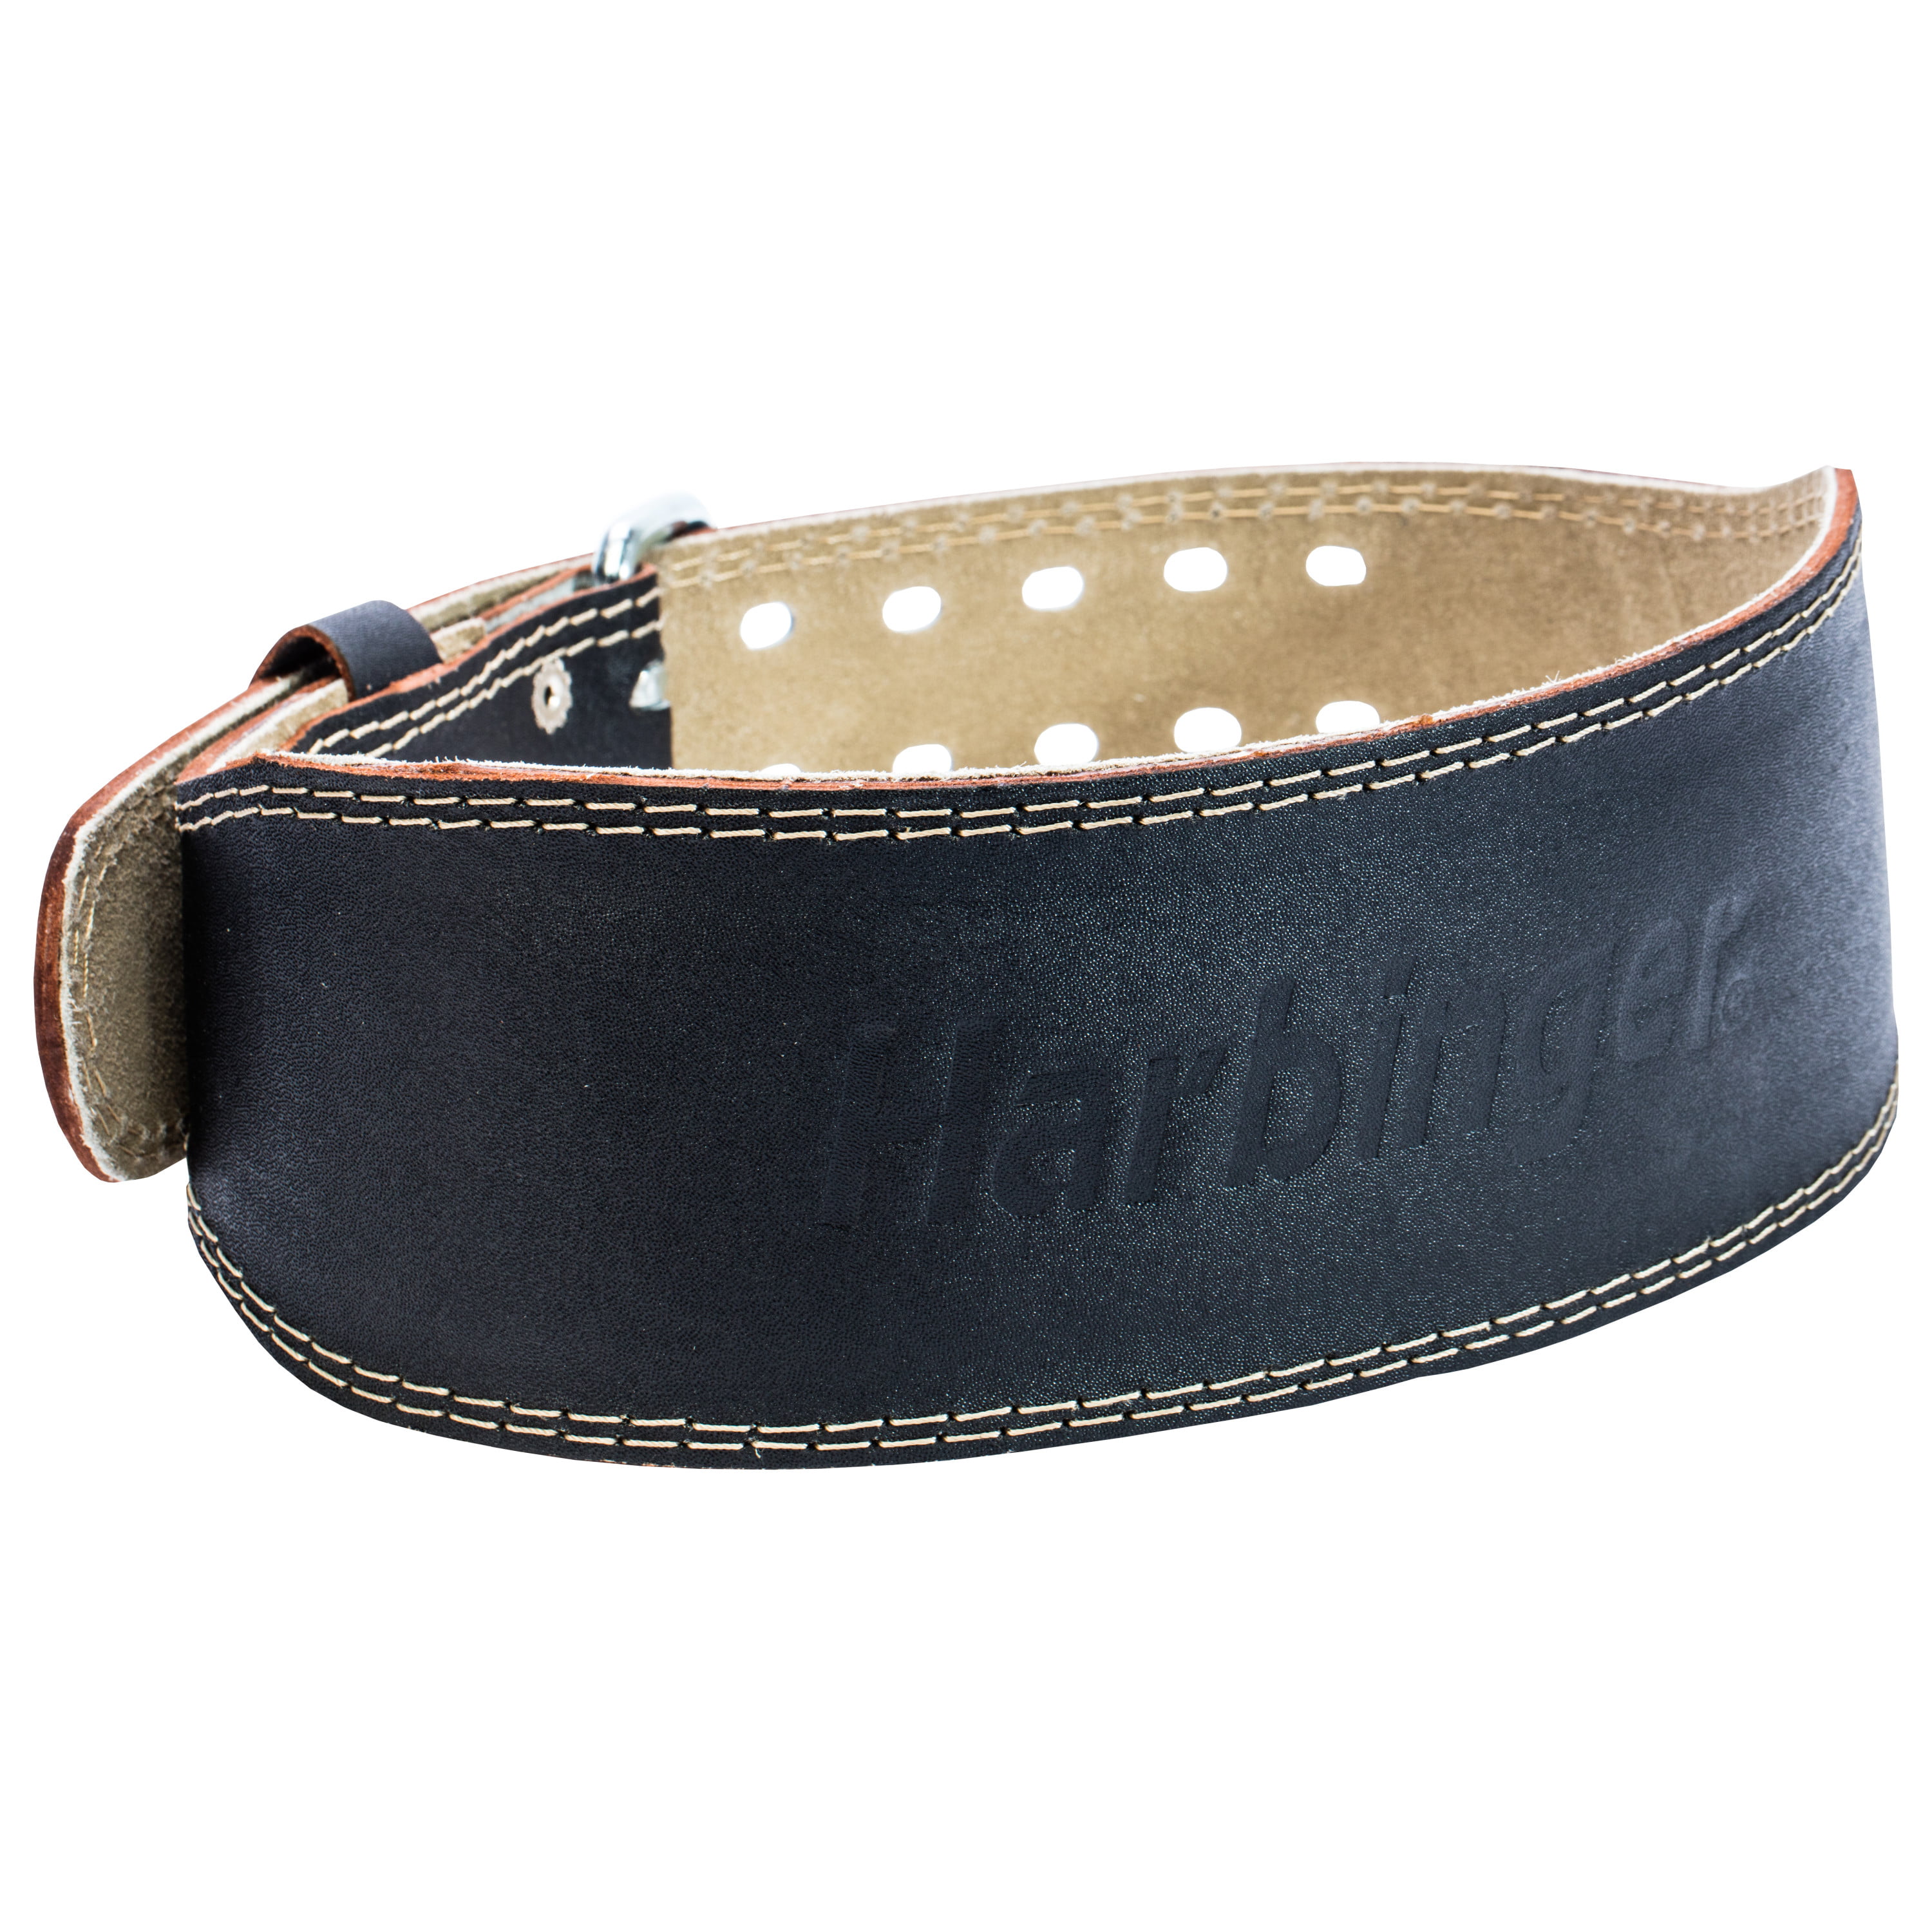 HARBINGER 4" PADDED LEATHER WEIGHT BELT **NEW WITH TAGS** SIZE MEDIUM 